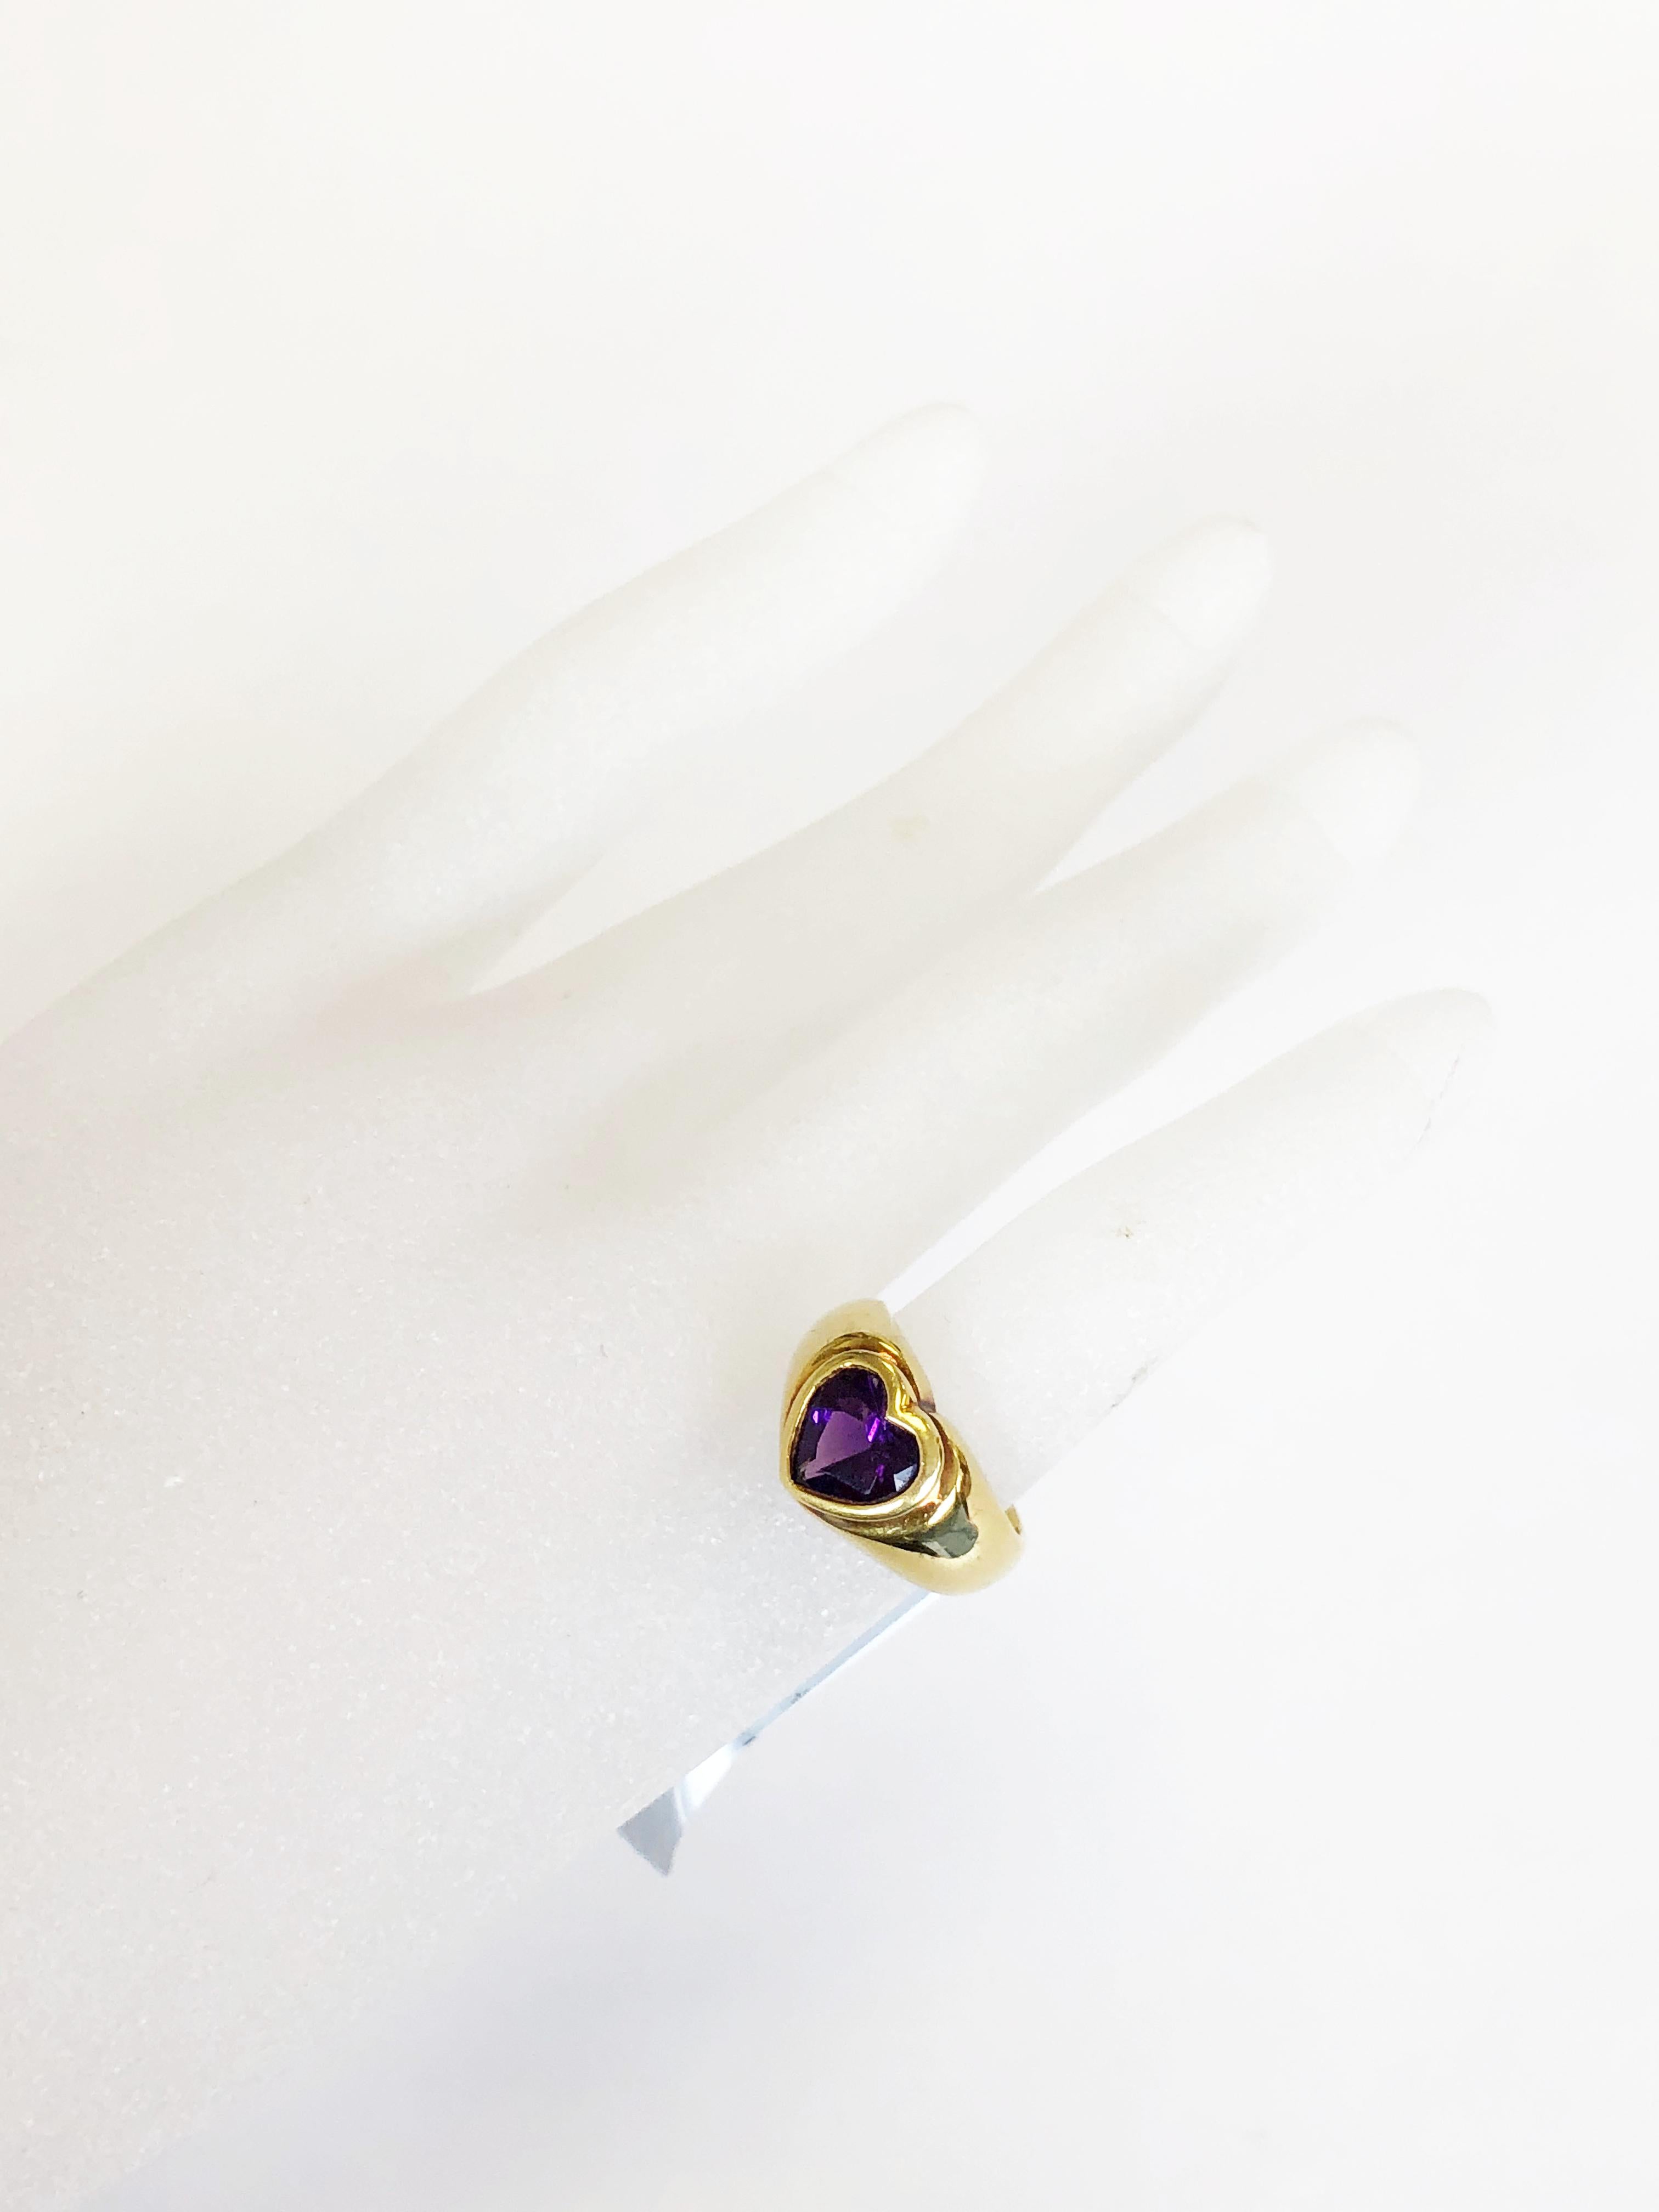 Classic estate Tiffany & Company heart shape amethyst and 18k yellow gold ring in size 4.5.  Perfect for a pinky ring or on it's own! 